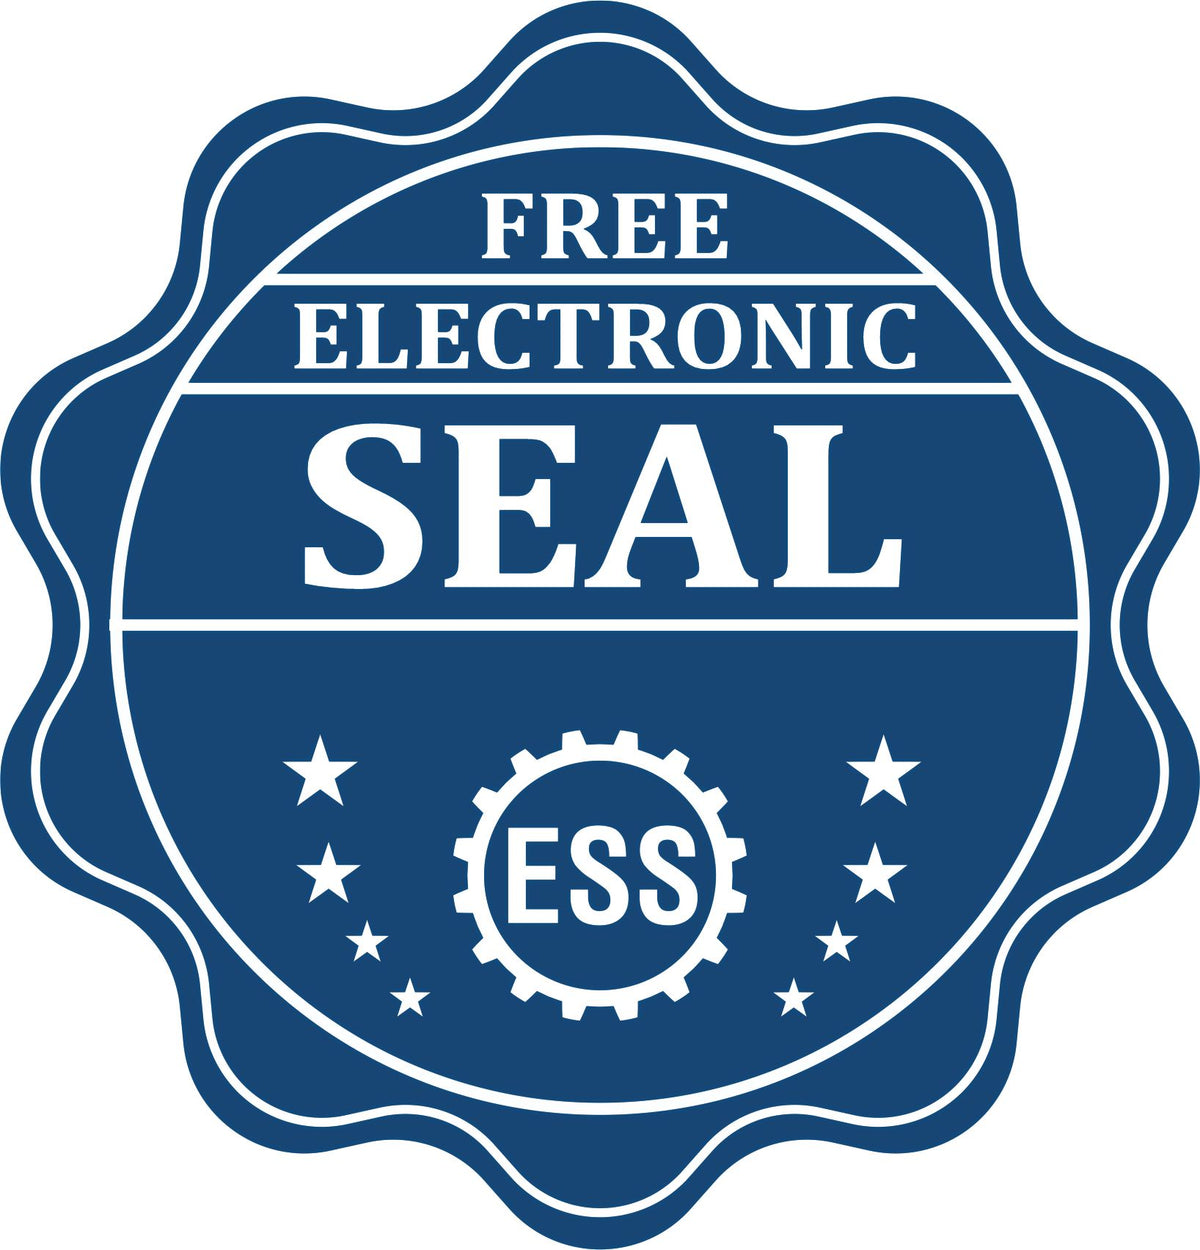 A badge showing a free electronic seal for the Self-Inking New York Geologist Stamp with stars and the ESS gear on the emblem.